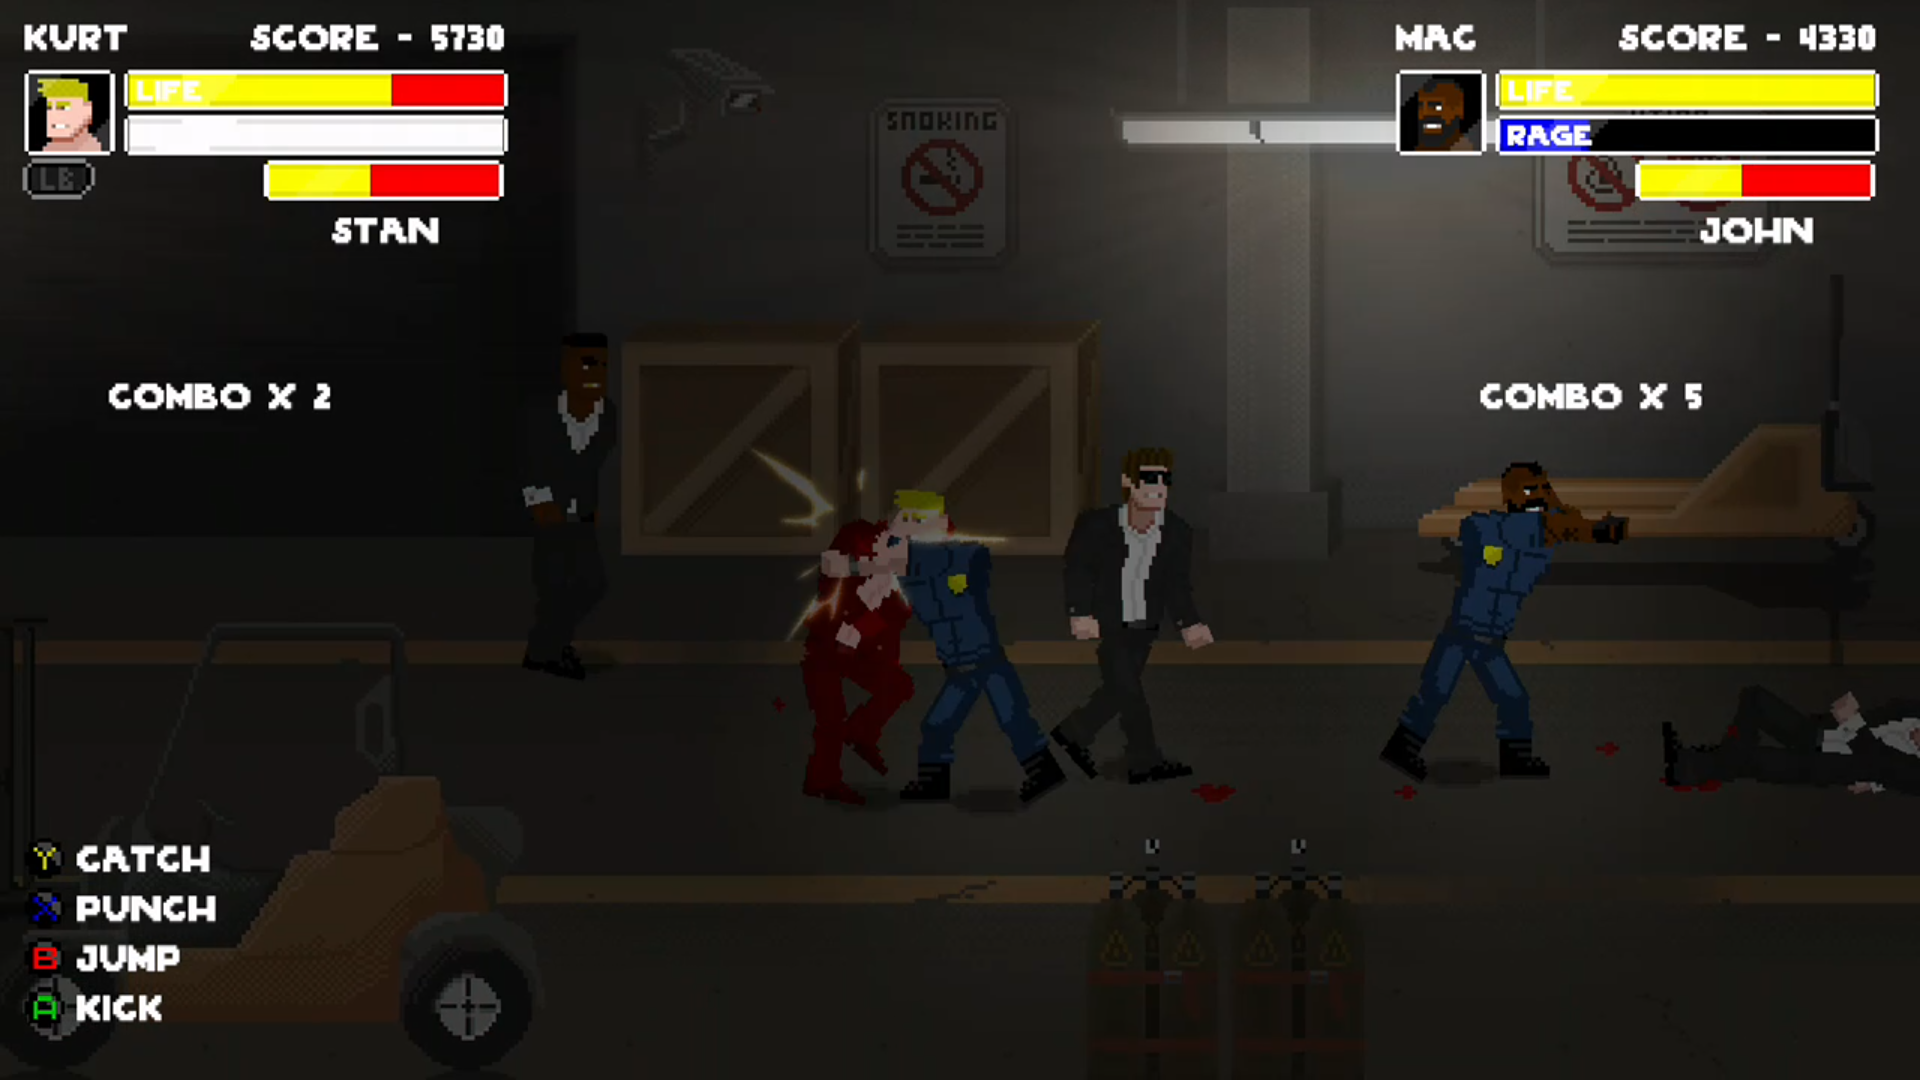 Friday the 13th: The Game Android APK / X